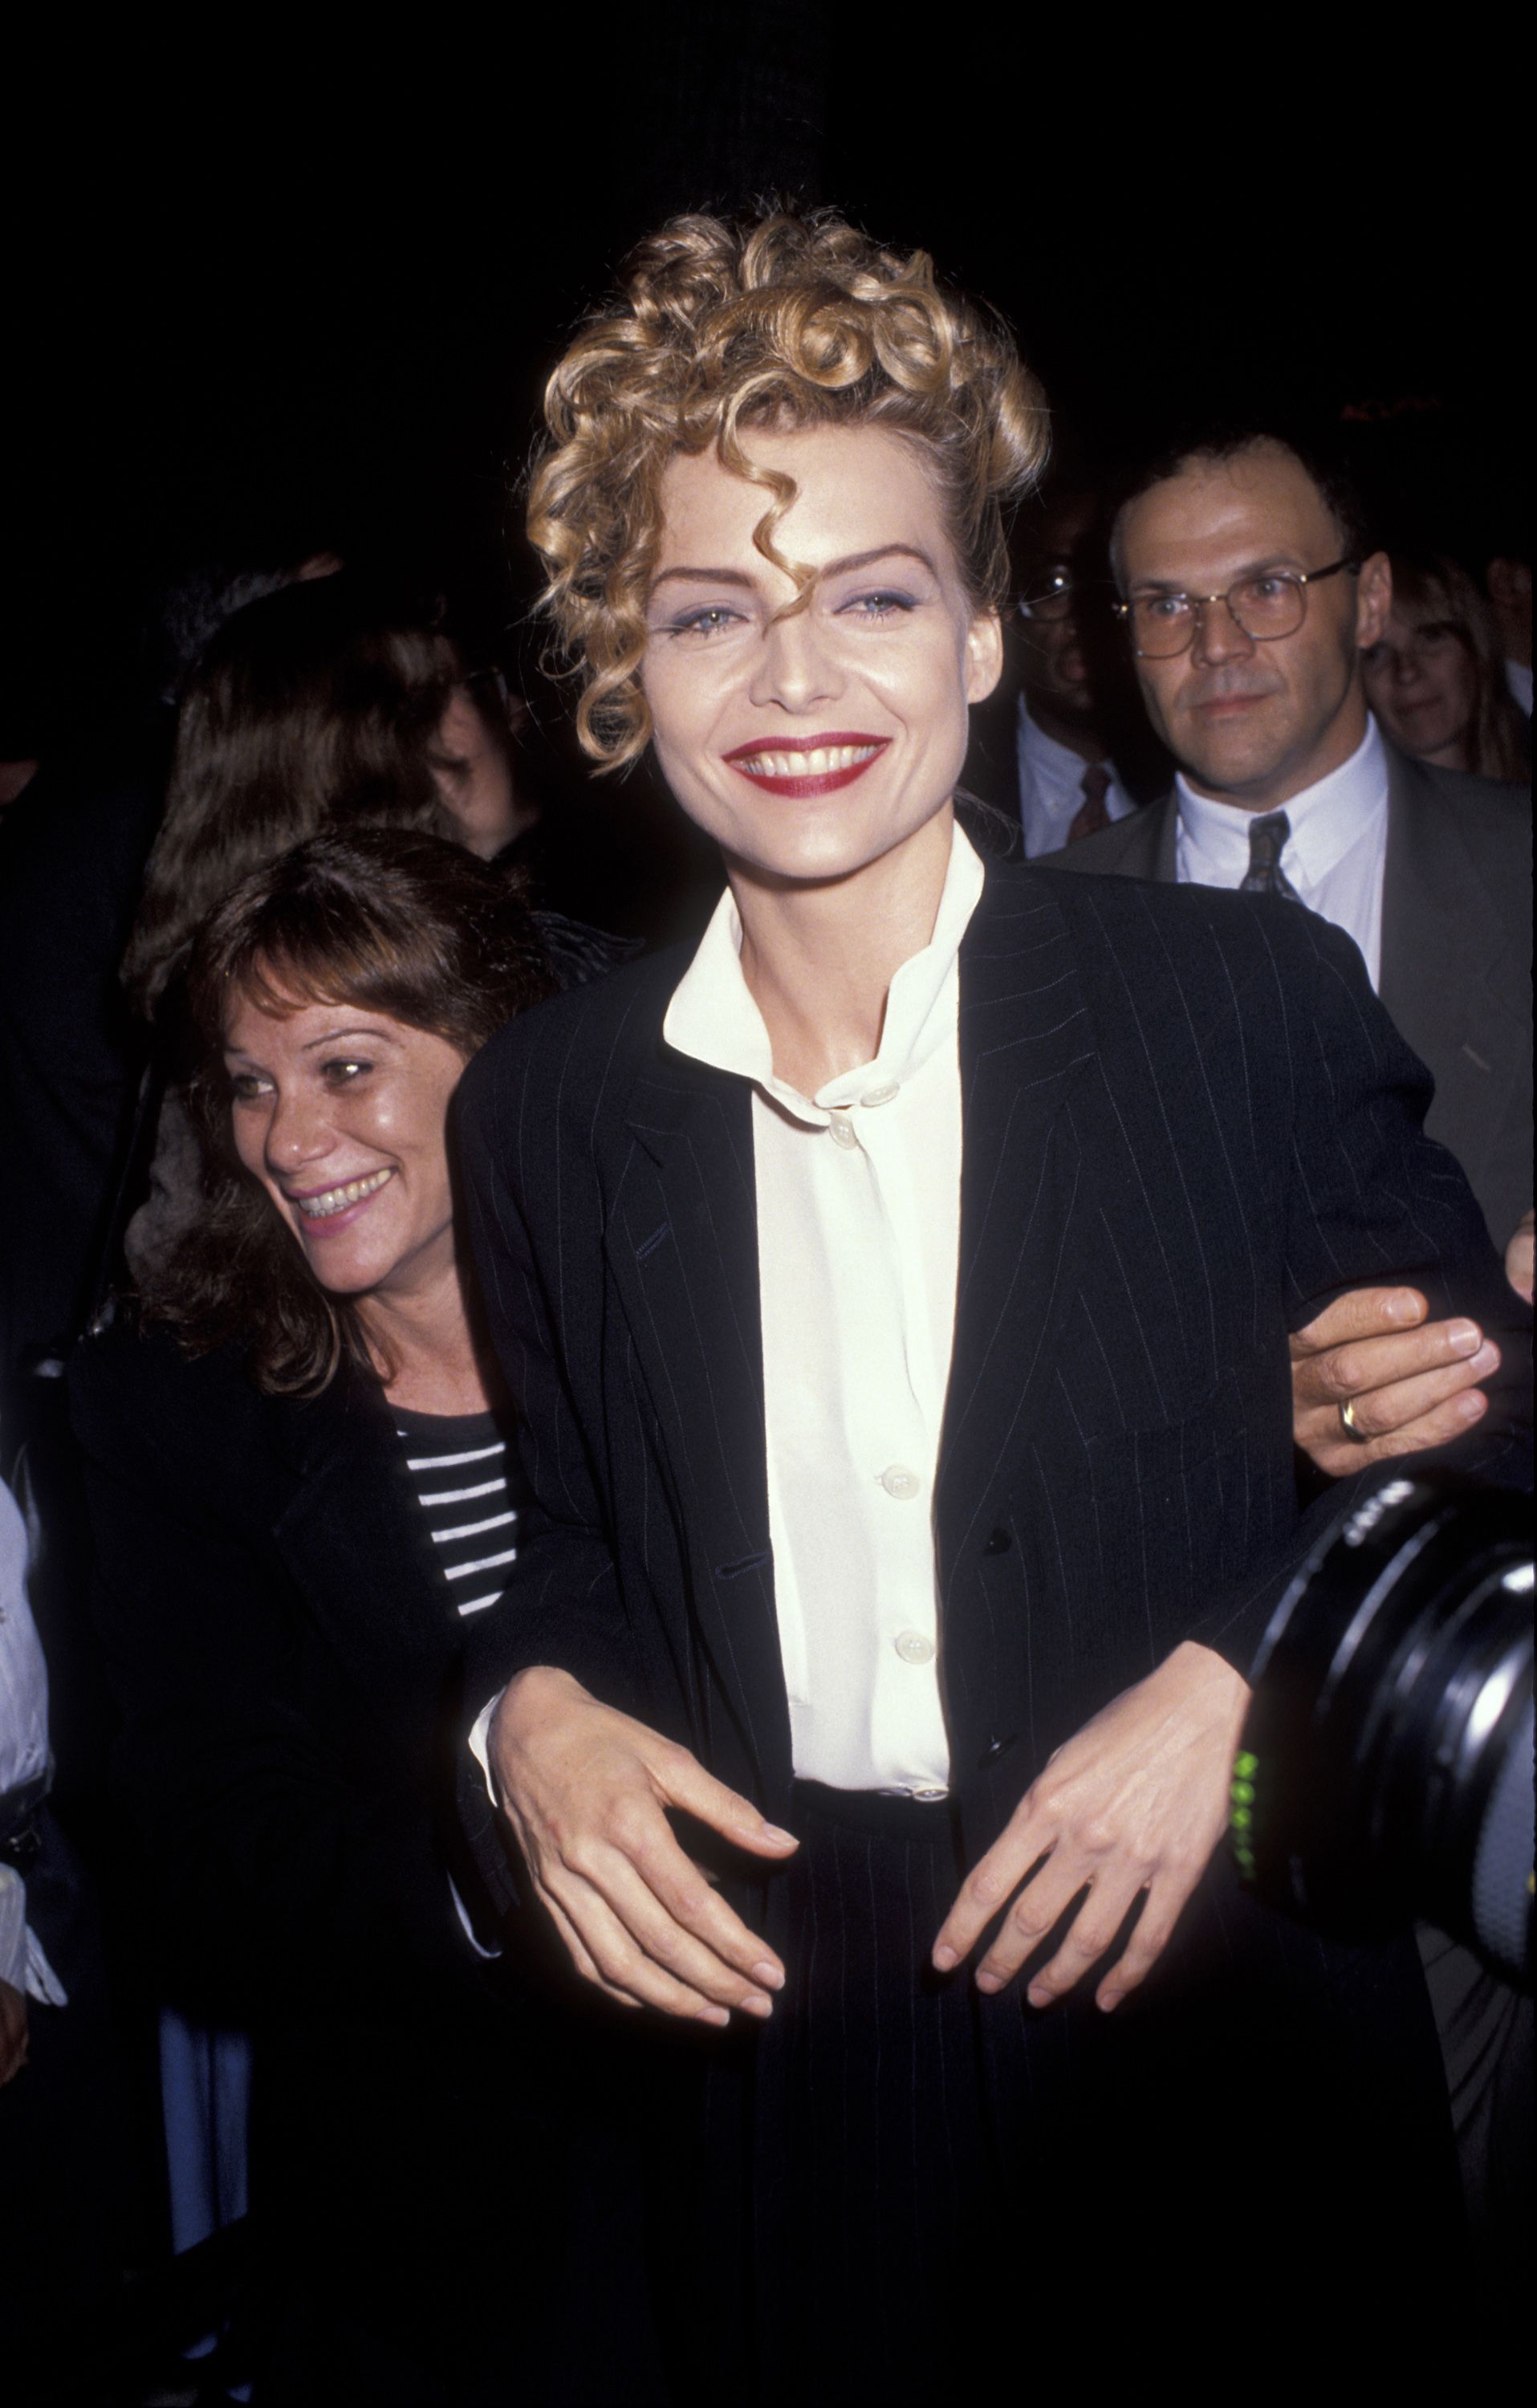 <p>Michelle Pfeiffer has frequently demonstrated her amazing sense of style over the years. The Golden Globe-winning actress, who got her start in television in the late 1970s, has played some of the most fashionable film characters out there, from the silk shift dress-clad Elvira Hancock in <em>Scarface</em> to the leather unitard-wearing Catwoman in <em>Batman Returns</em>. And while Pfeiffer’s on-screen looks are unforgettable, the star has proved time and time again that she’s just as fashion-forward off-screen. <br><br>From her signature tailored pantsuits to her embroidered red carpet ensembles, we took a closer look at Pfeiffer’s style evolution through the years. </p>